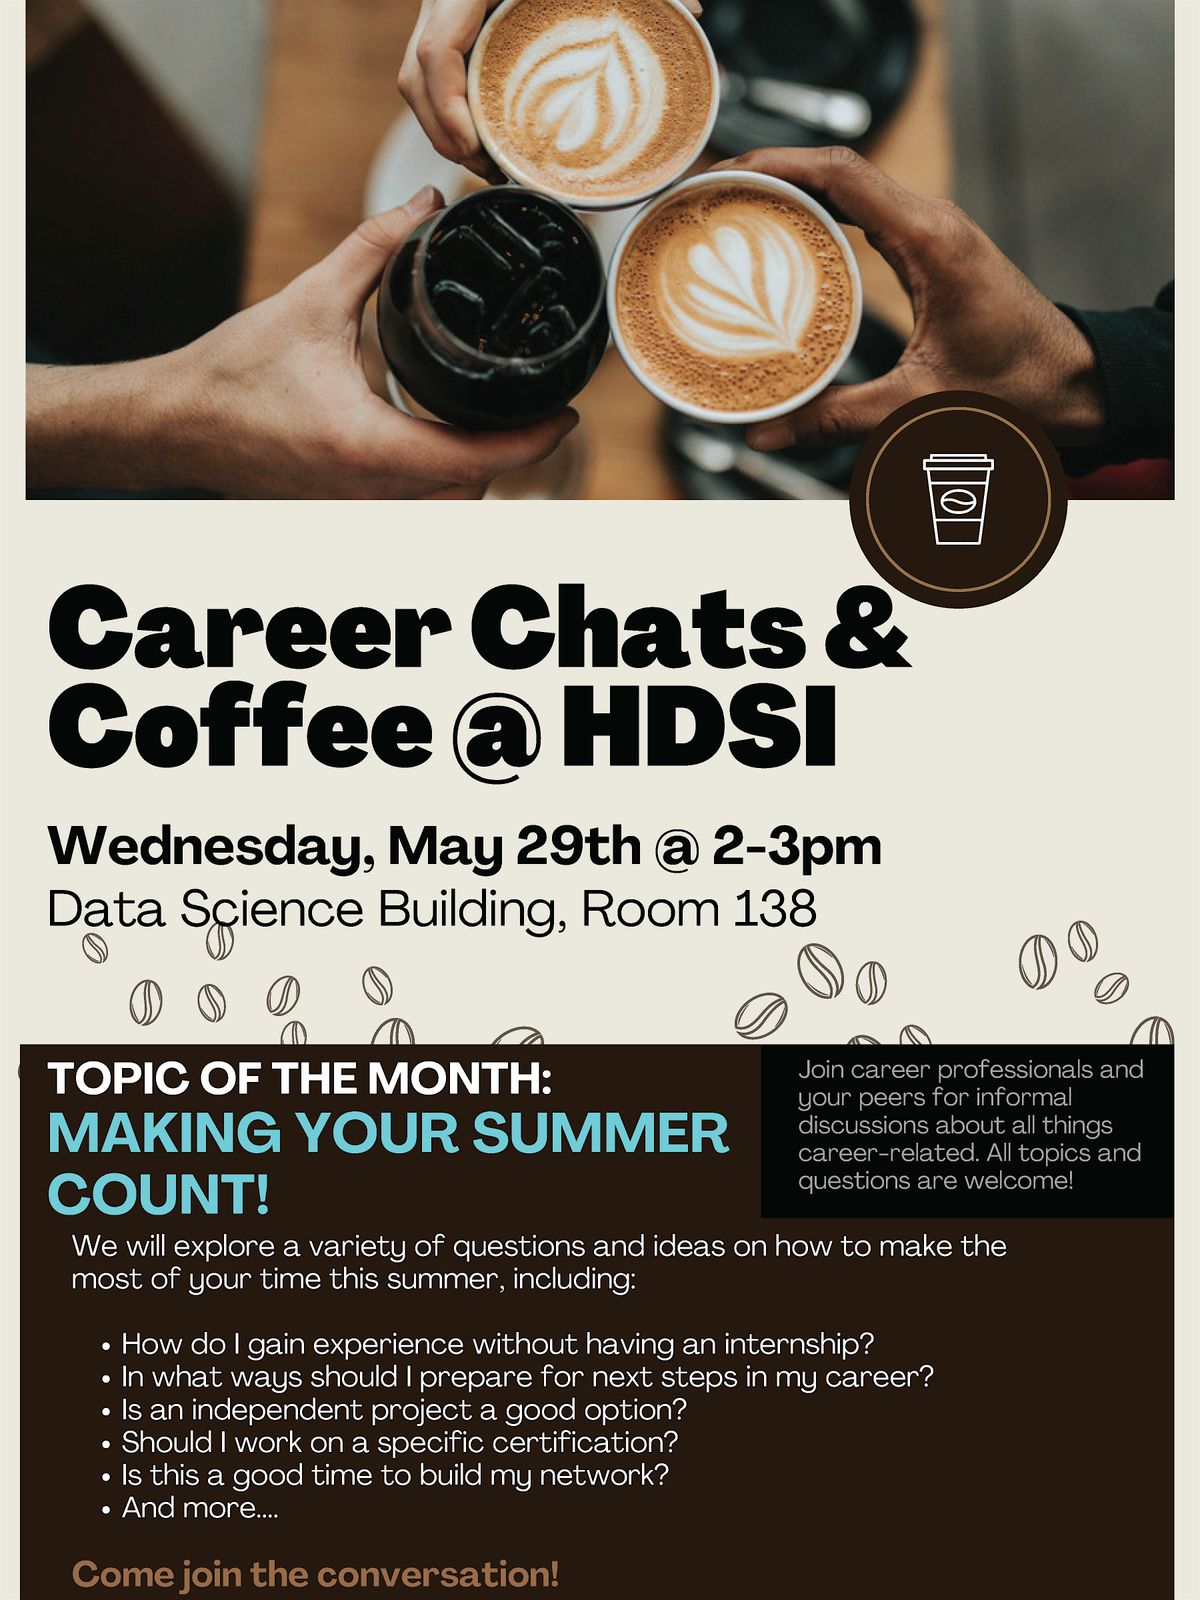 Career Chats & Coffee Topic: Making your summer count!